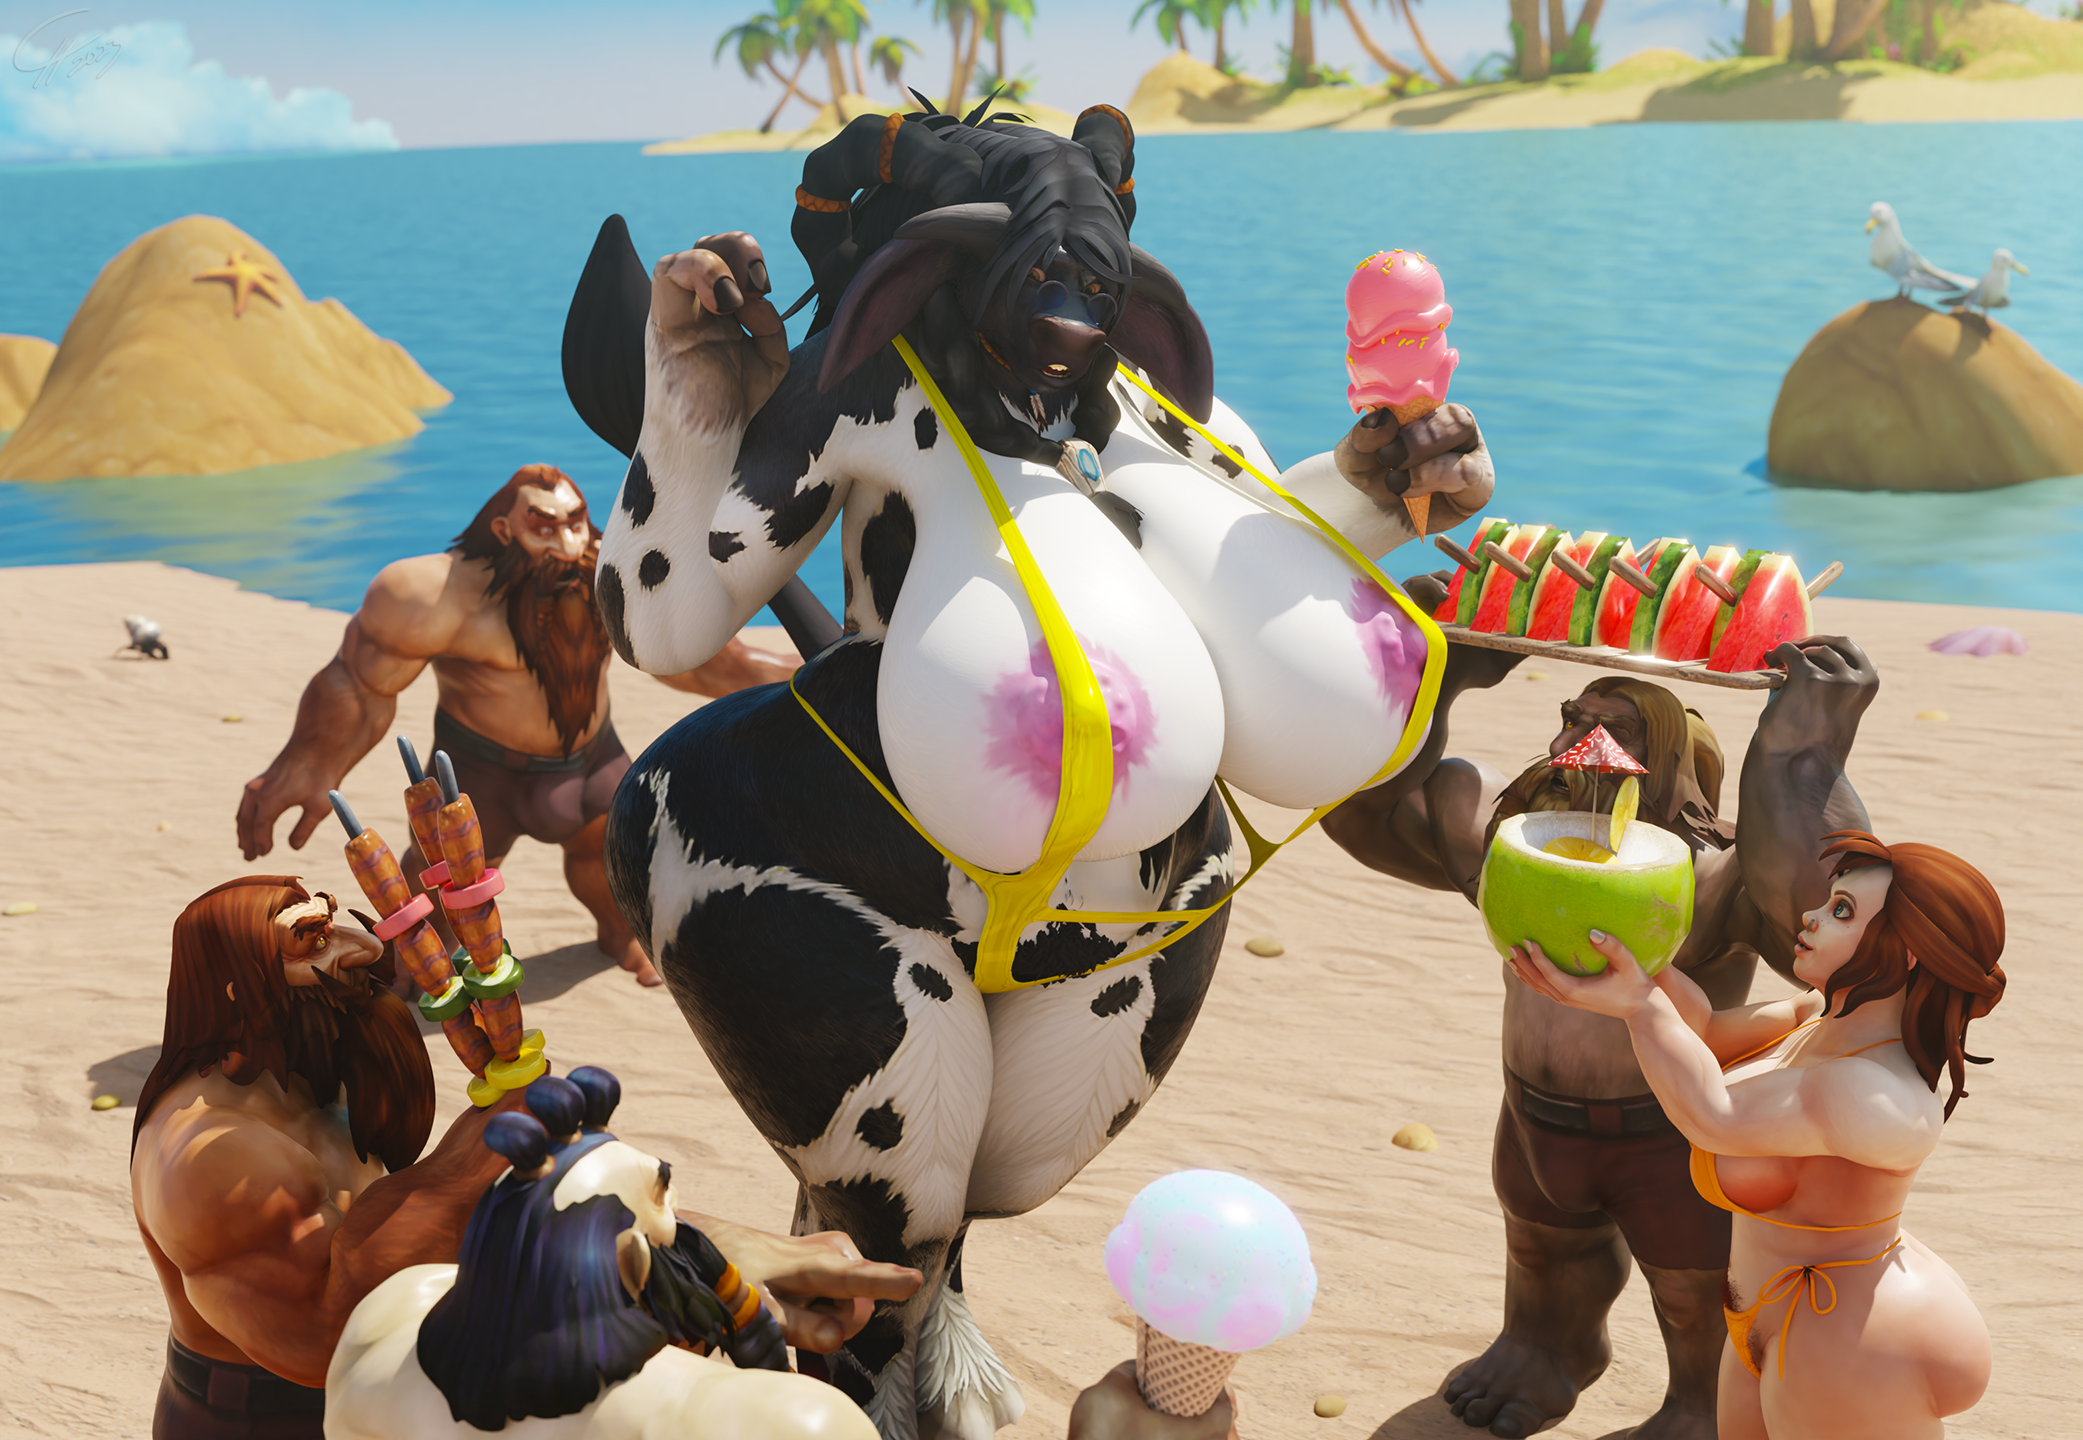 Ice Cream at the Beach [Tauren/BBW/Tease]
Normally, she doesn't wear anything [b]this[/b]
revealing, but she wanted to try out what her
colleague had tried few summers back.
Yet she wasn't expecting this kind of attention.
[b][url=http://bakaras.com/murlocish/albums/userpics/10001/15/NahimanaBeach2023XL.png]===XL-Size Edit===[/url][/b]
Keywords: OC;Tauren;BBW;Tease;Pinup;dwarf